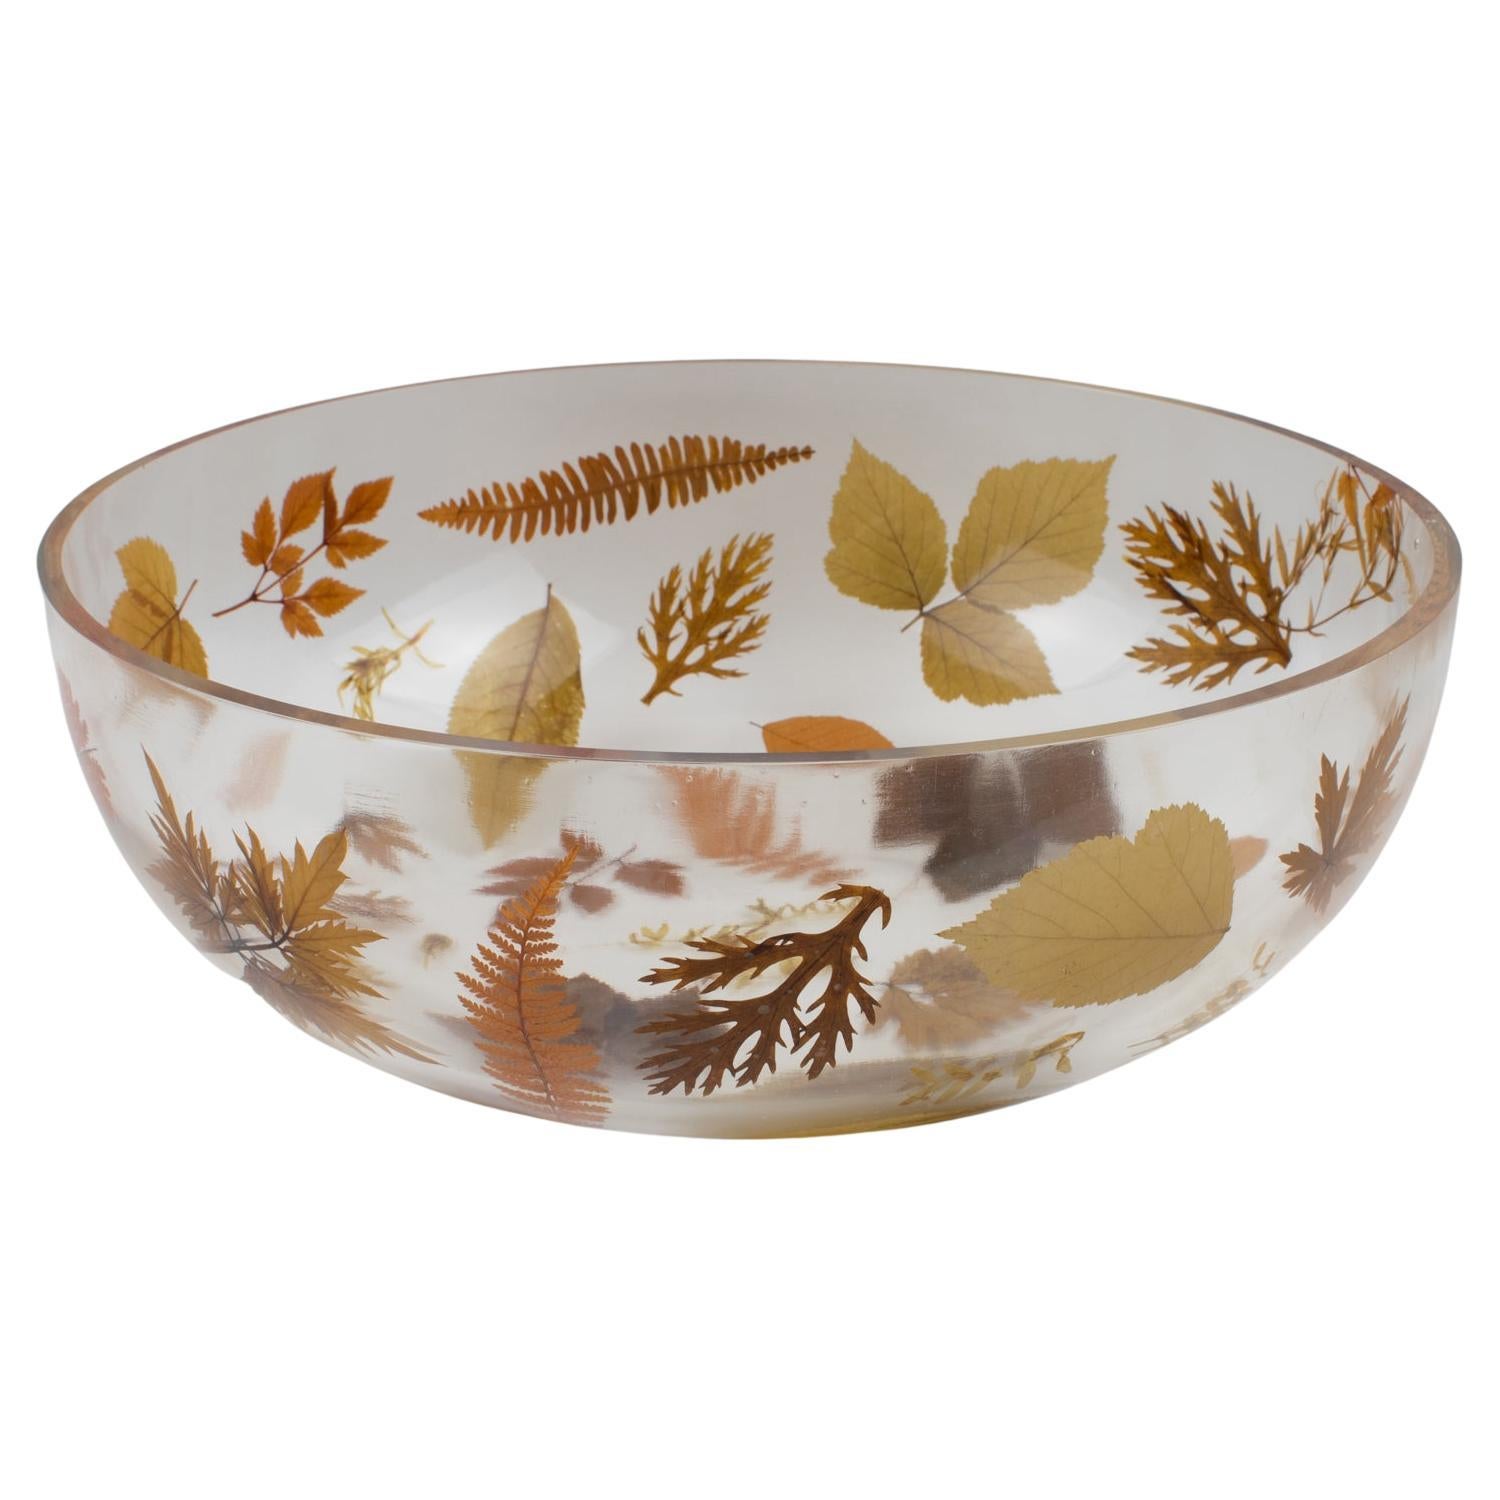 Italian Resin Centerpiece Bowl with Leaves and Flowers Inclusions, 1970s